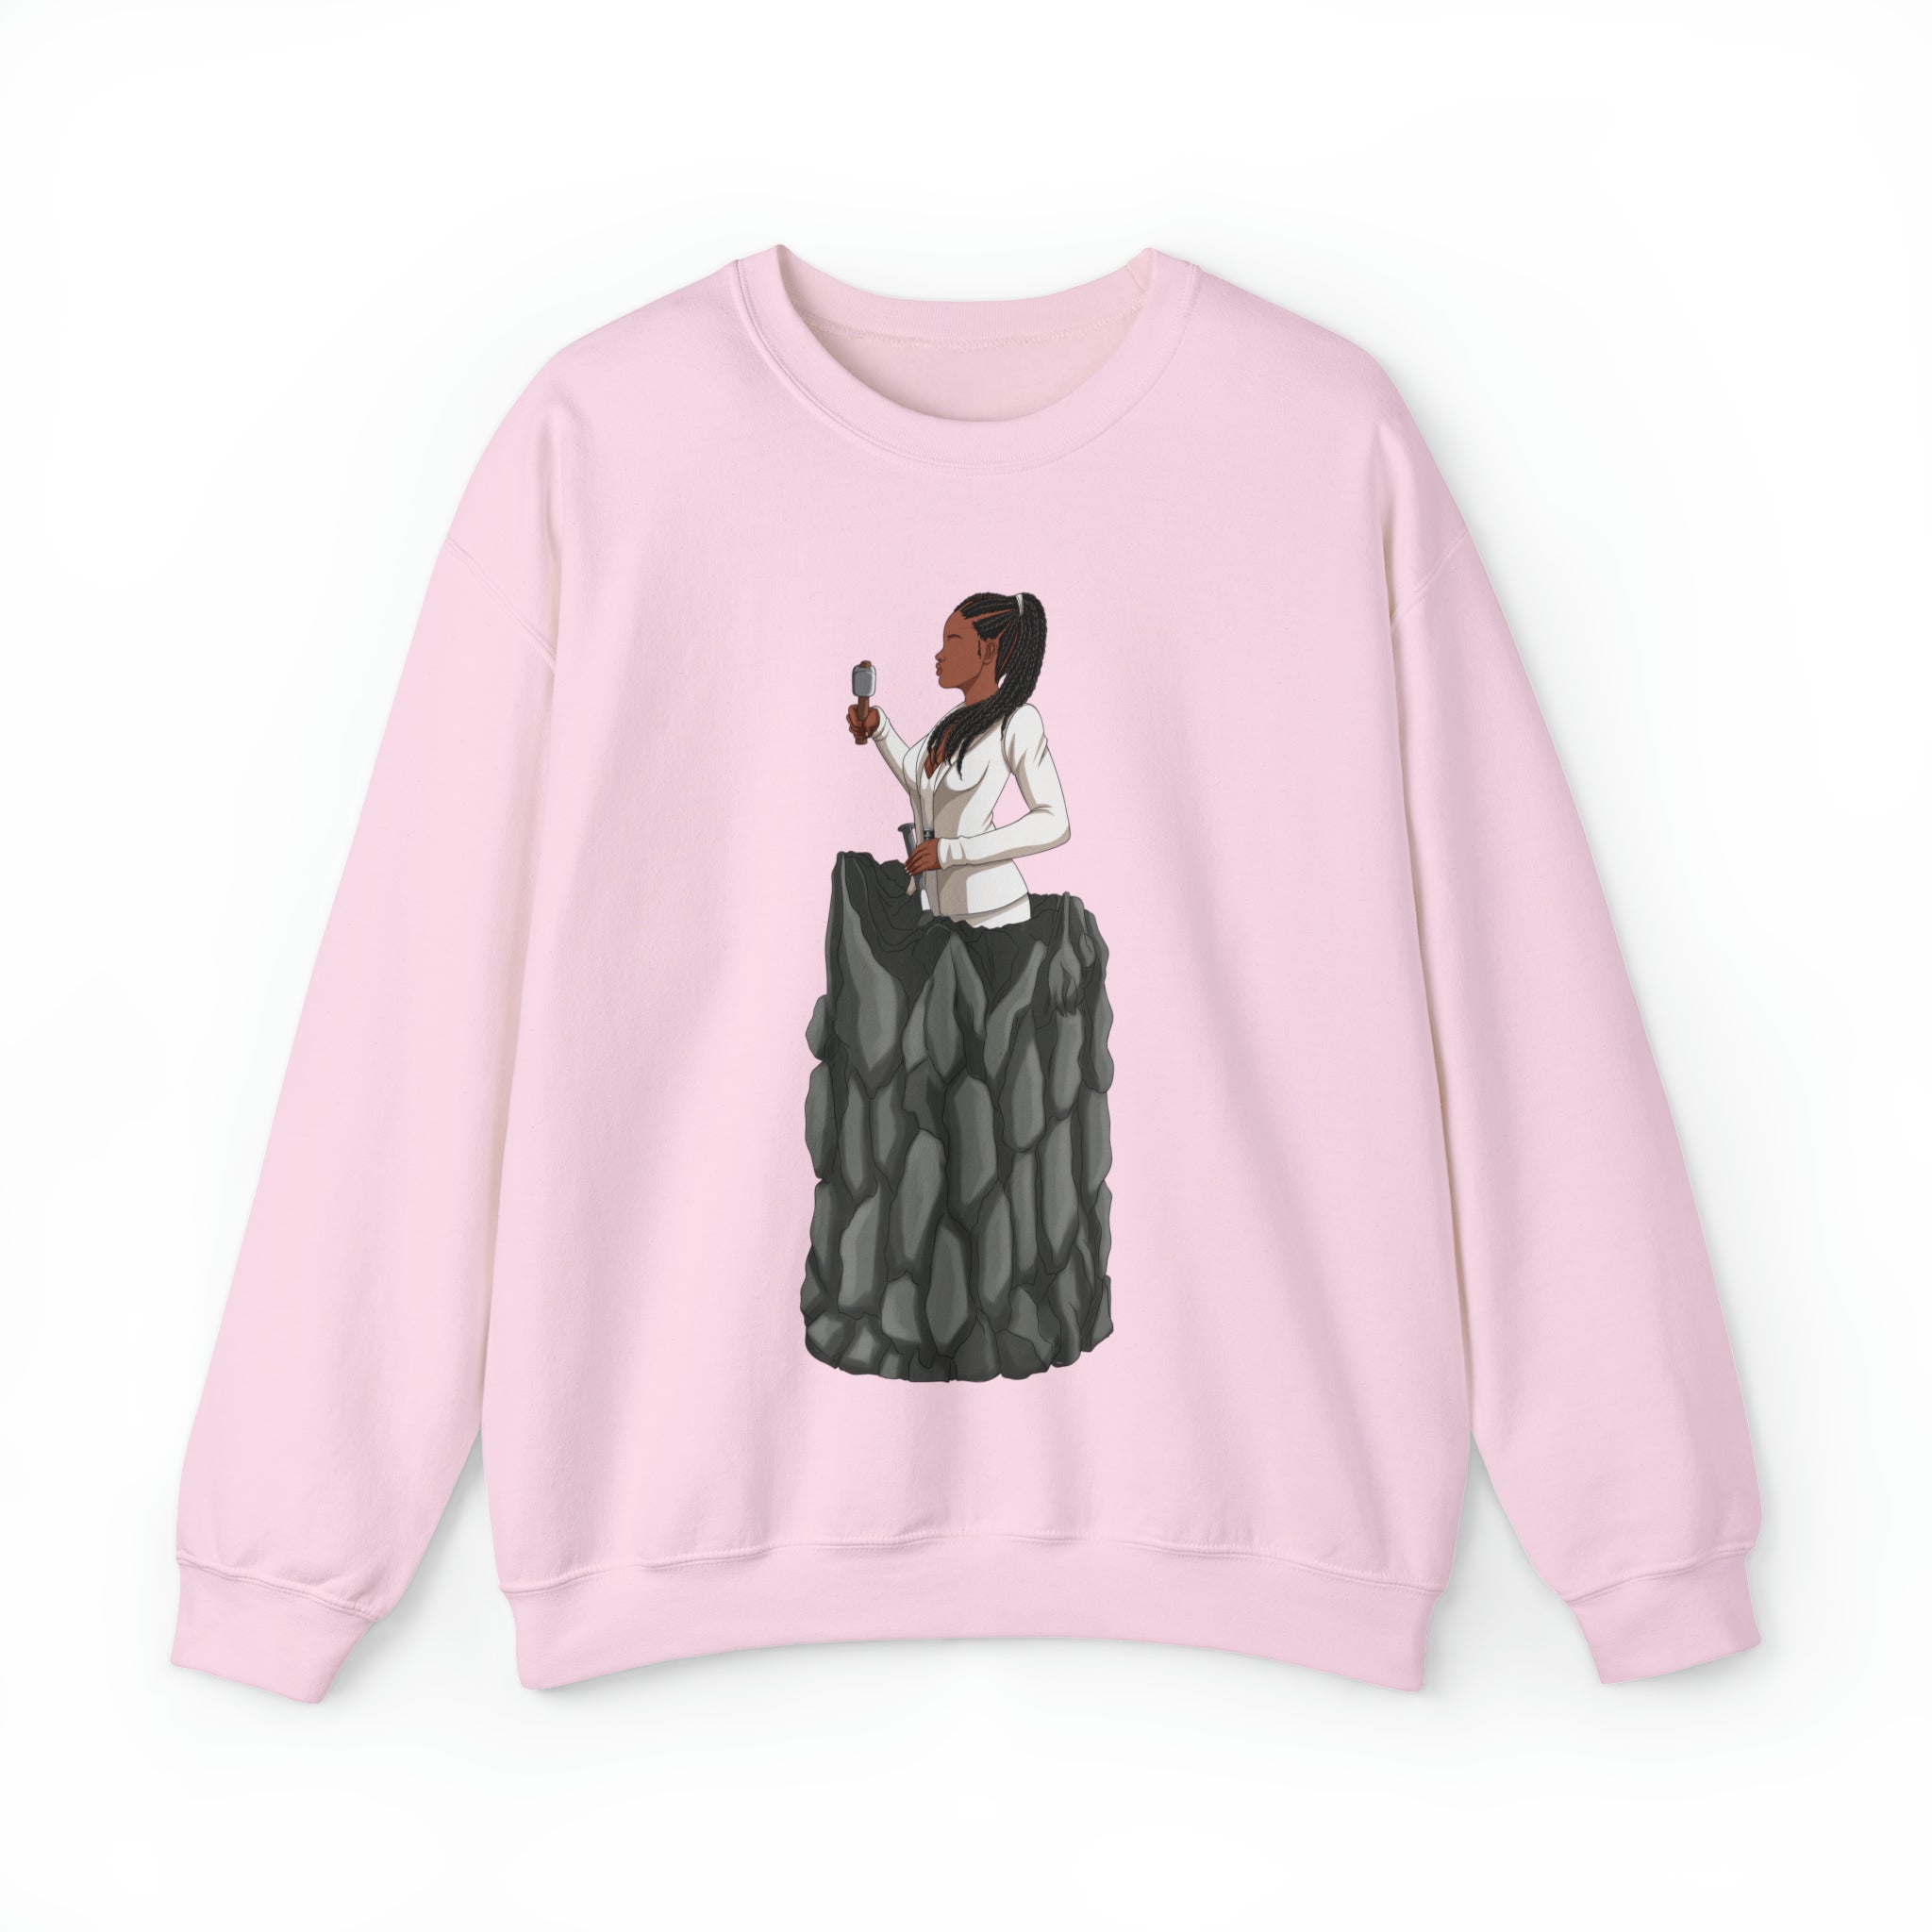 A person working hard to better his/herself - Self-Made Sweatshirt Heavy Blend™ Crewneck - woman #4 -Breakthrough Collection